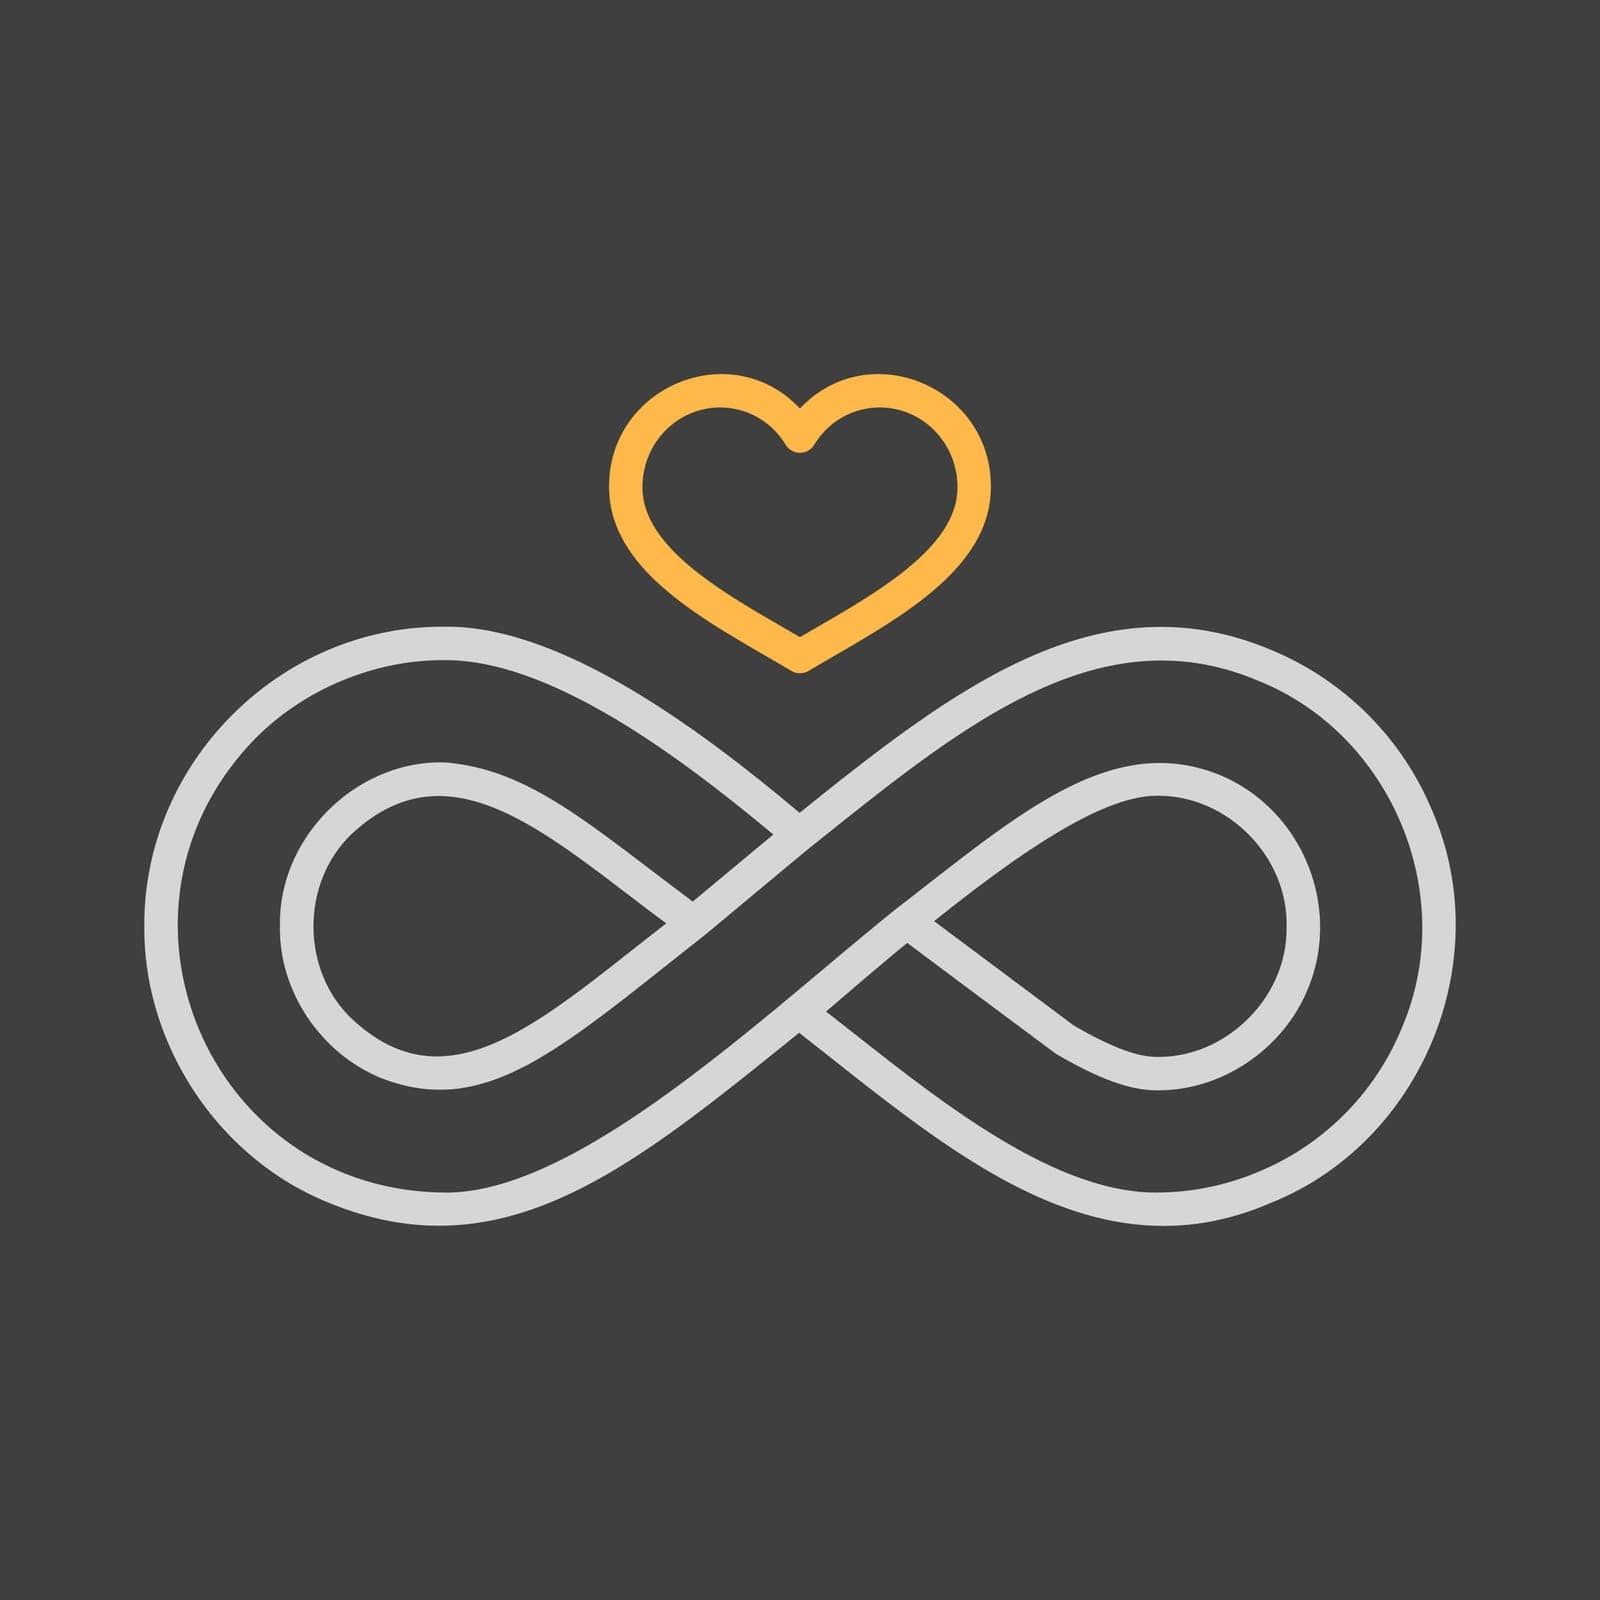 Infinity sign and heart symbol of eternal love isolated on dark background icon. Vector illustration, romance elements. Sticker, patch, badge, card for marriage, valentine